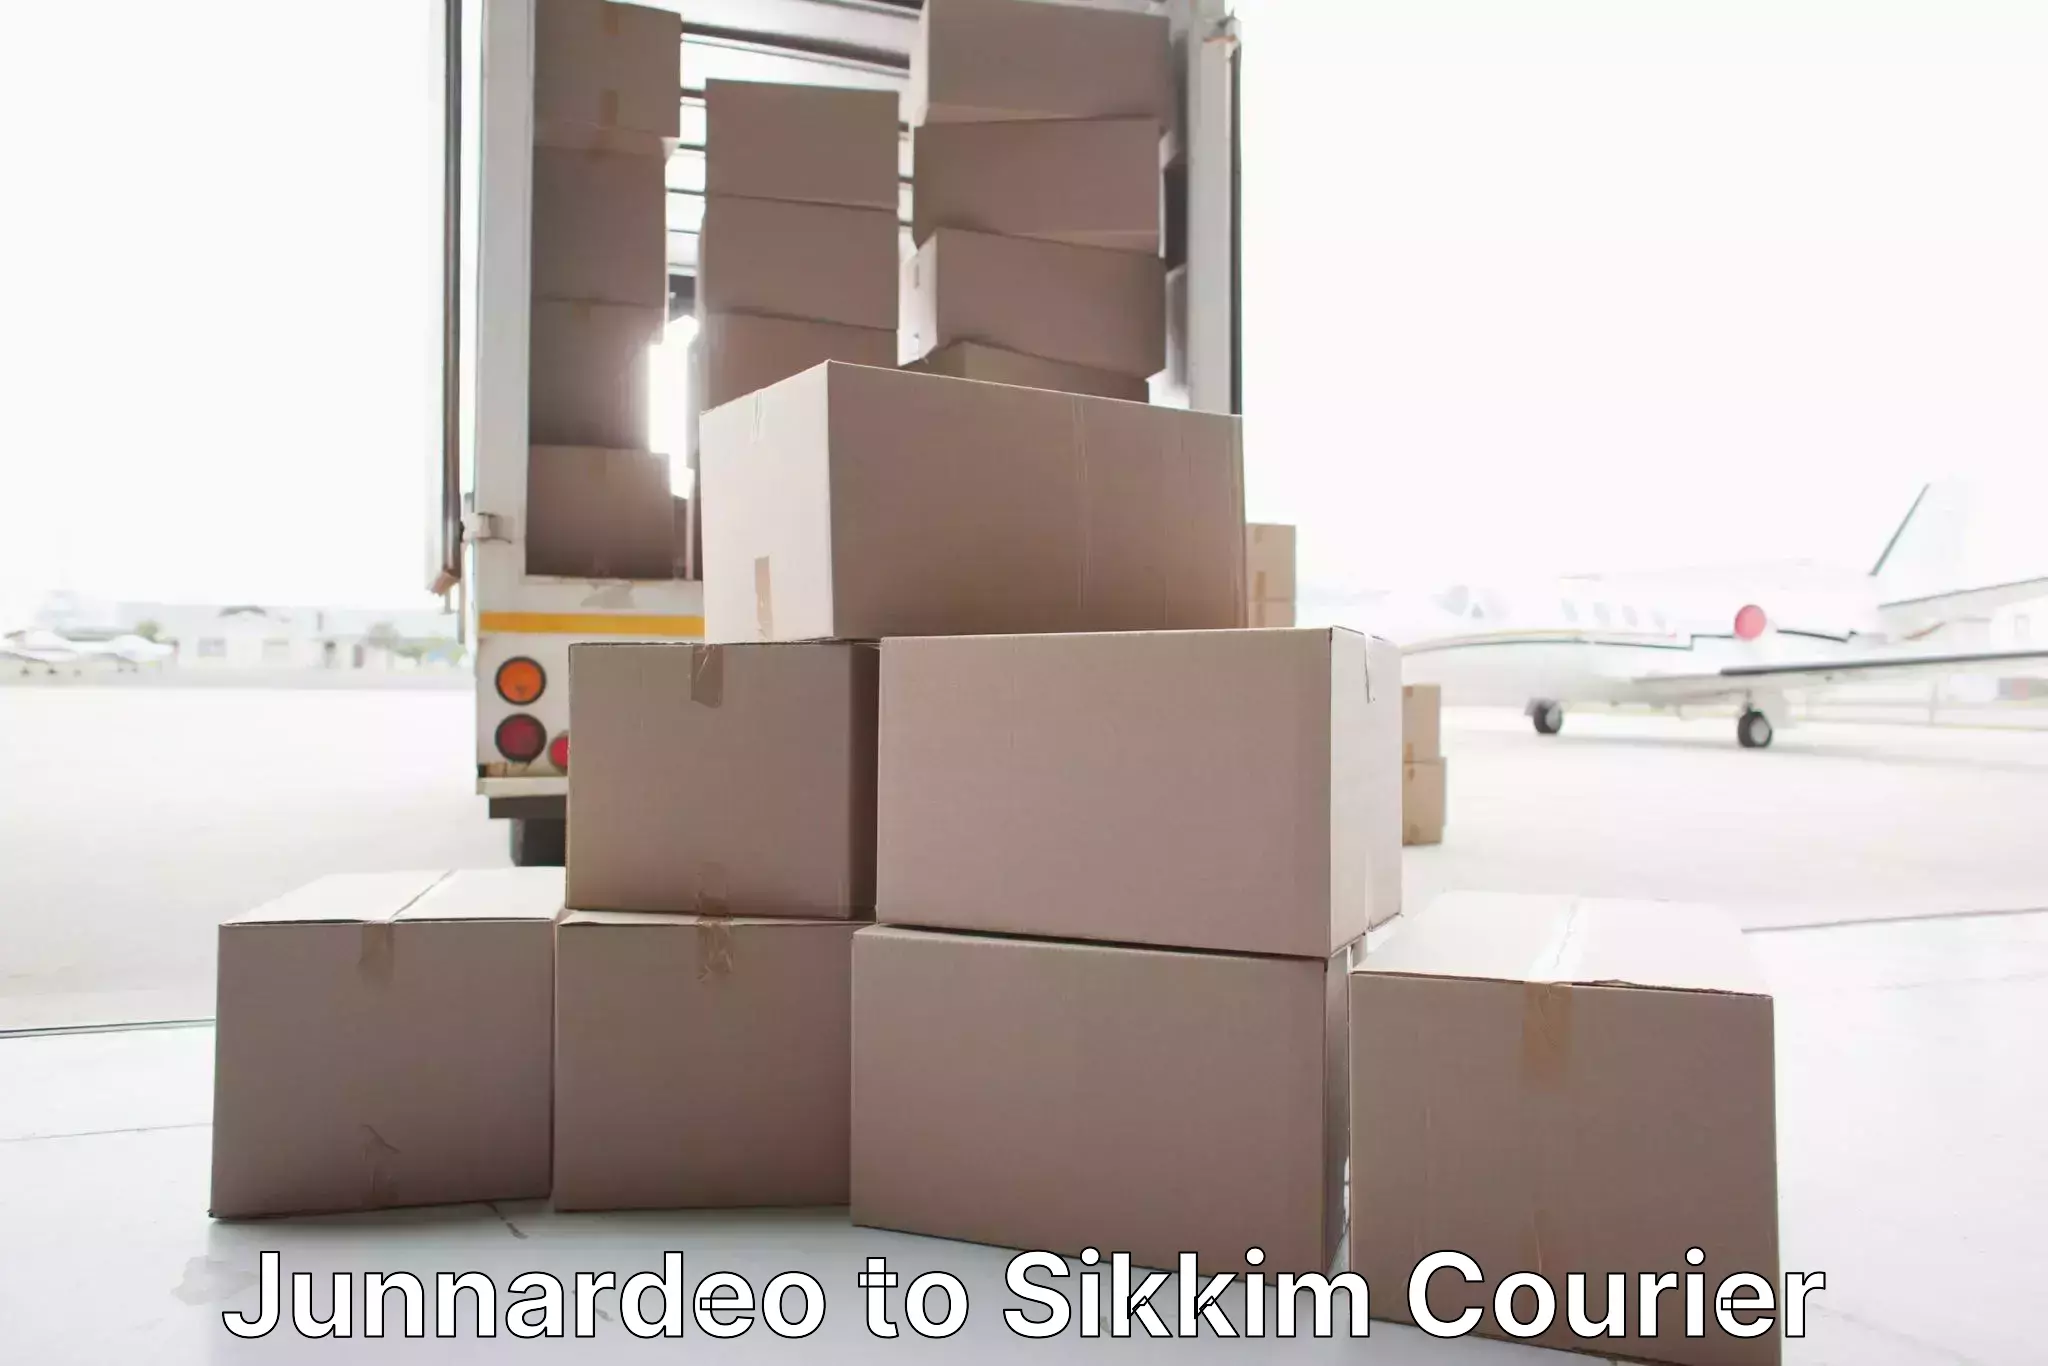 Expert moving and storage Junnardeo to Sikkim